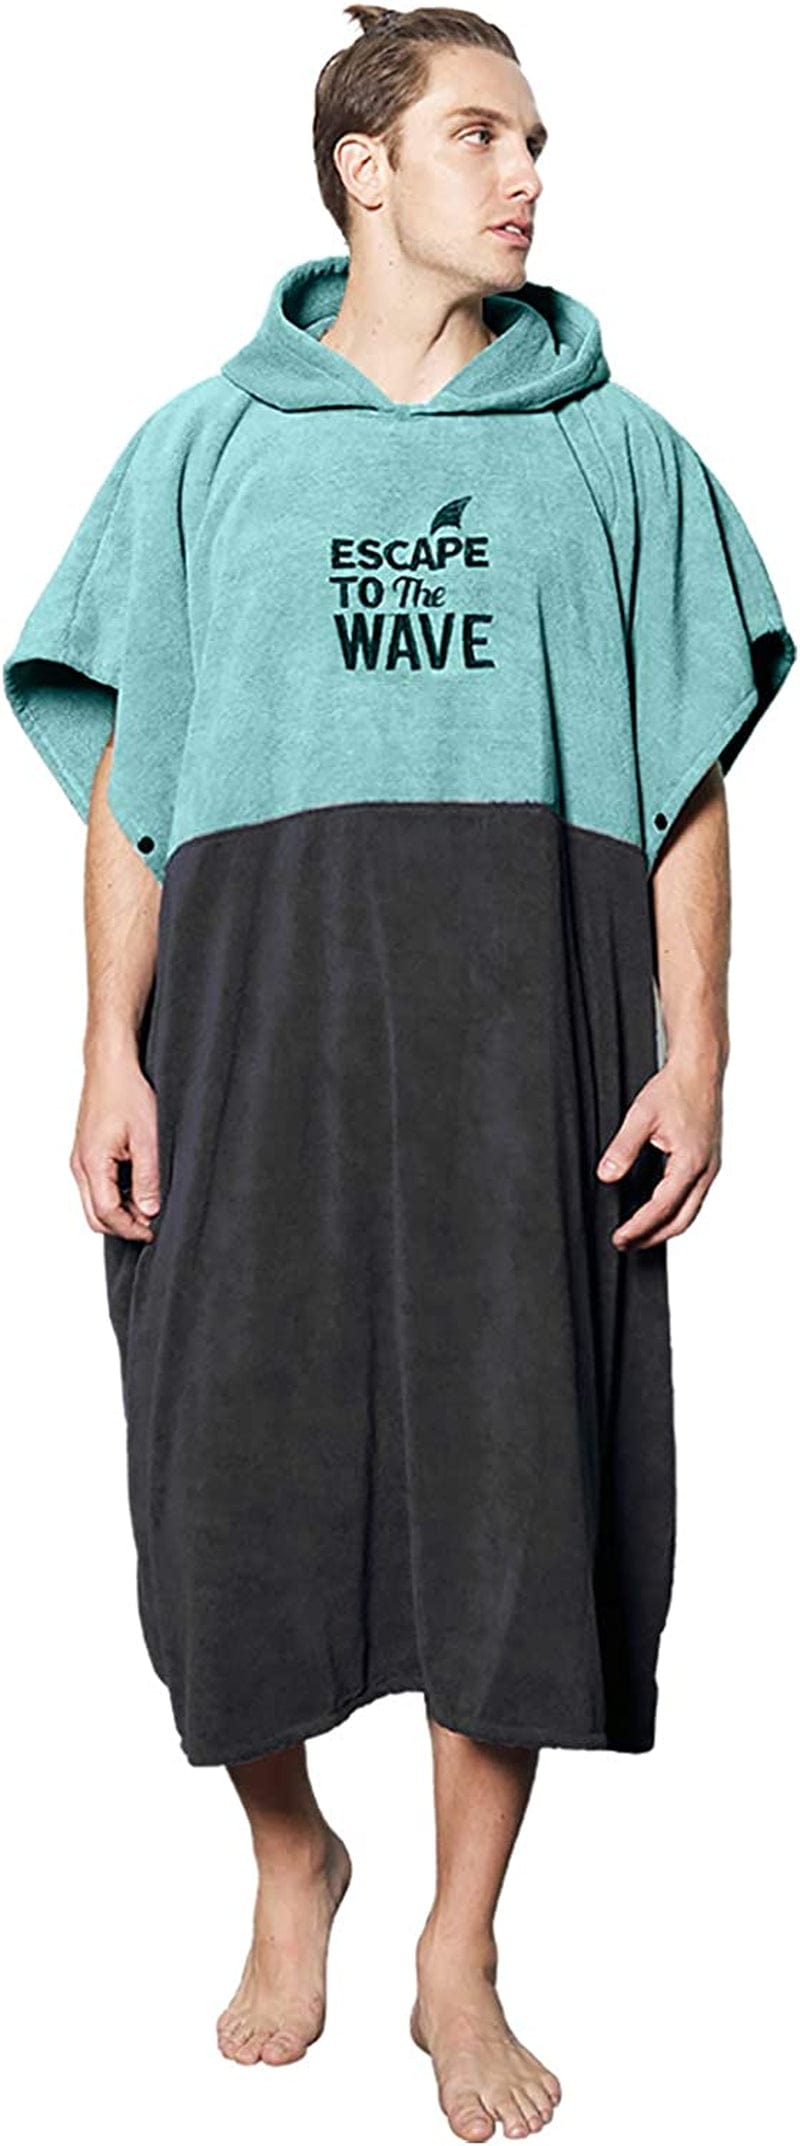 Vulken Extra Large Teal Blue Thick Hooded Beach Towel Changing Robe. Surf Poncho Men for Easy Change in Public. Quick Dry Microfiber Towelling for the Beach, Pool, Lake, Water Park. L/XL Home & Garden > Linens & Bedding > Towels Vulken Turquoise  